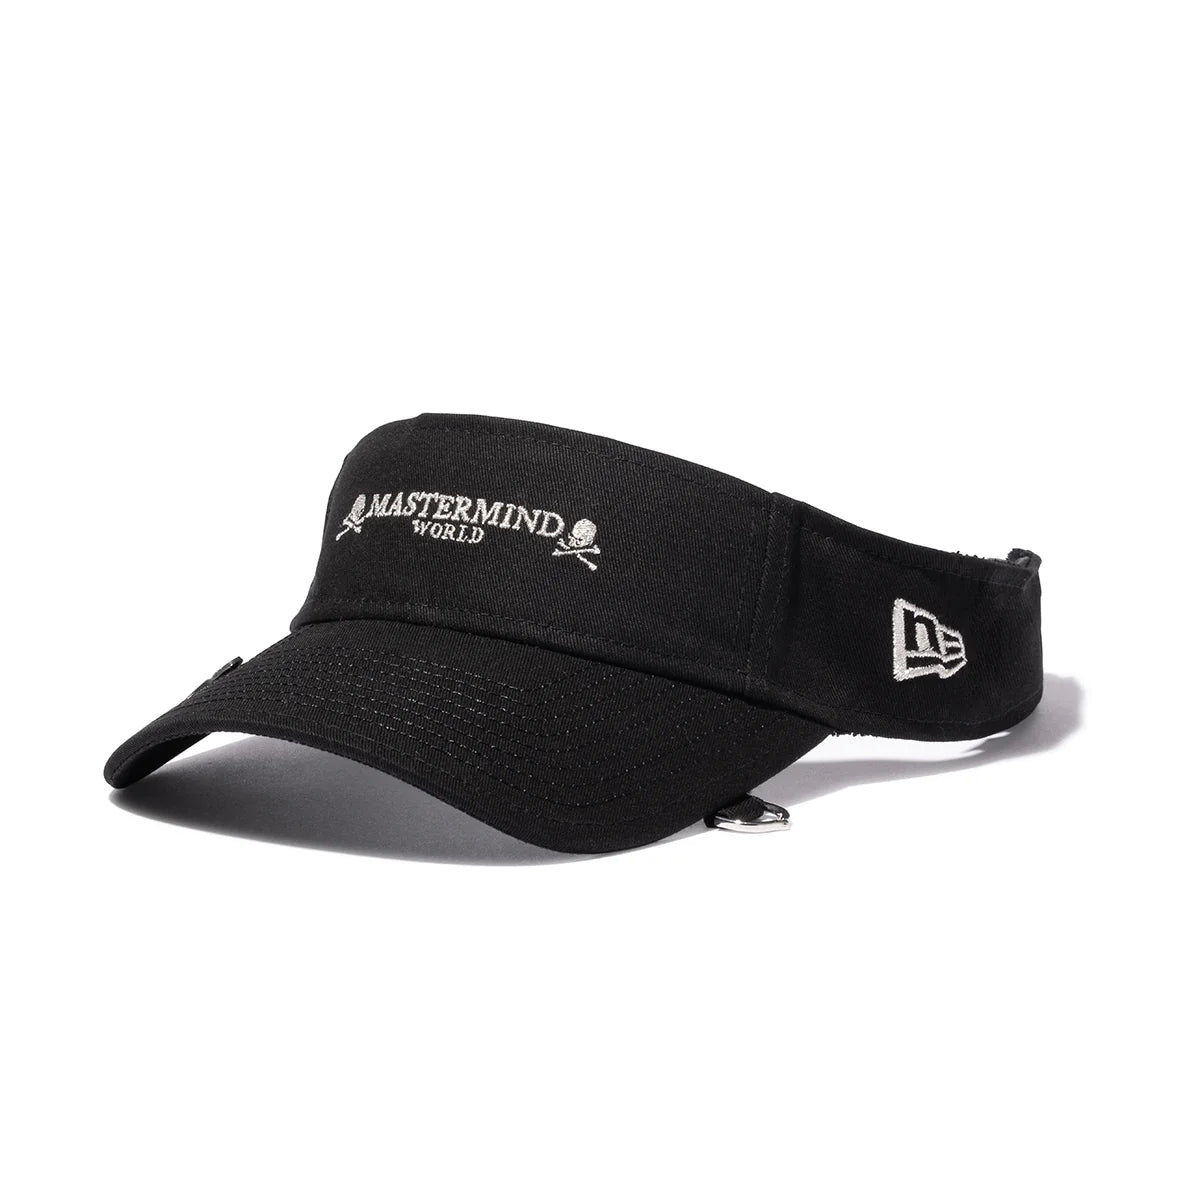 MASTERMIND】 Collaboration items with “NEW ERA GOLF” will be on